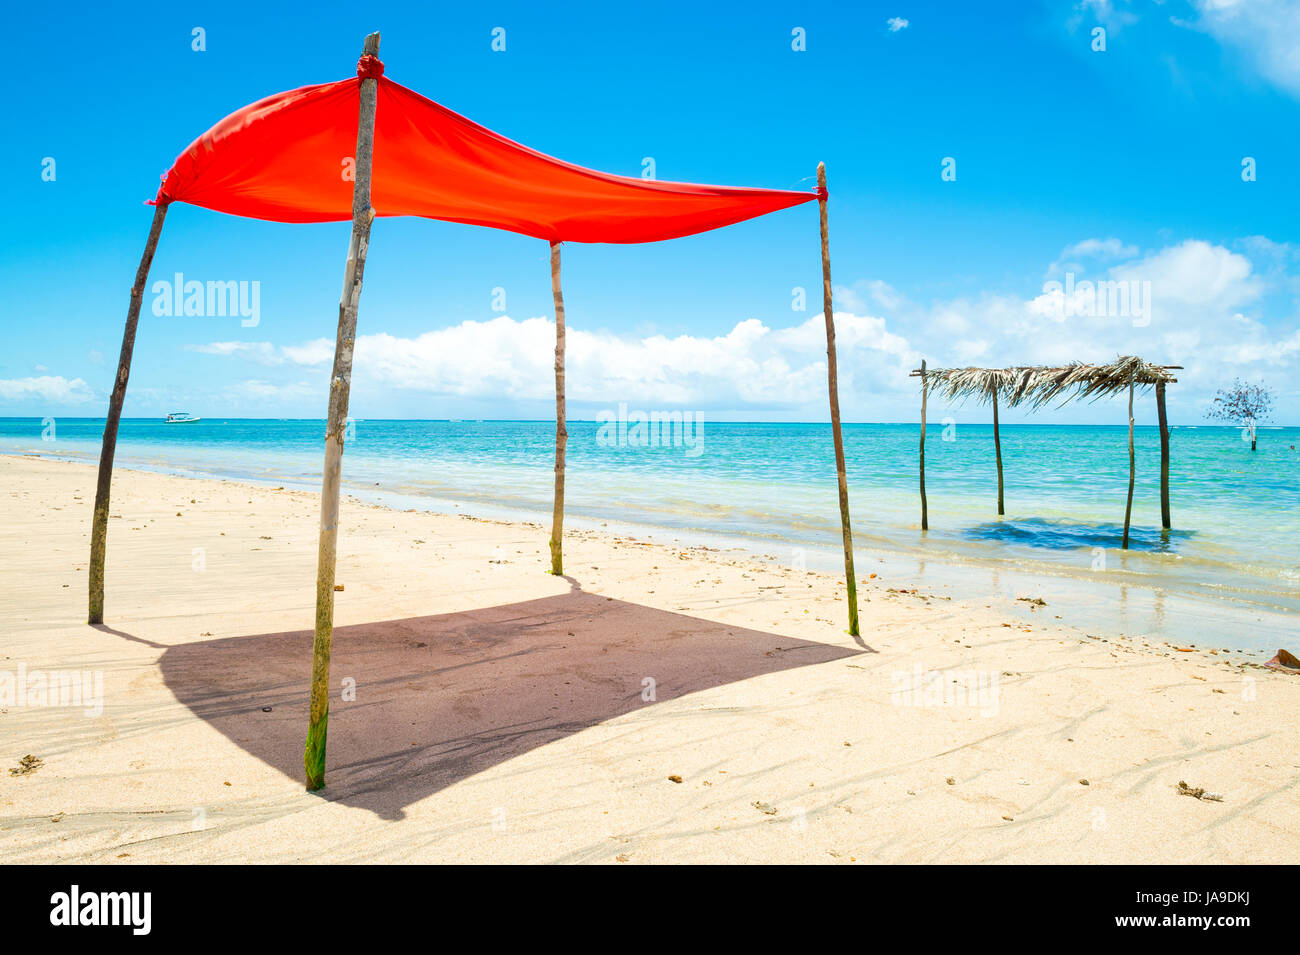 Rustic sun shade made from a sheet strung from sticks stands on an empty beach in Bahia, Brazil Stock Photo